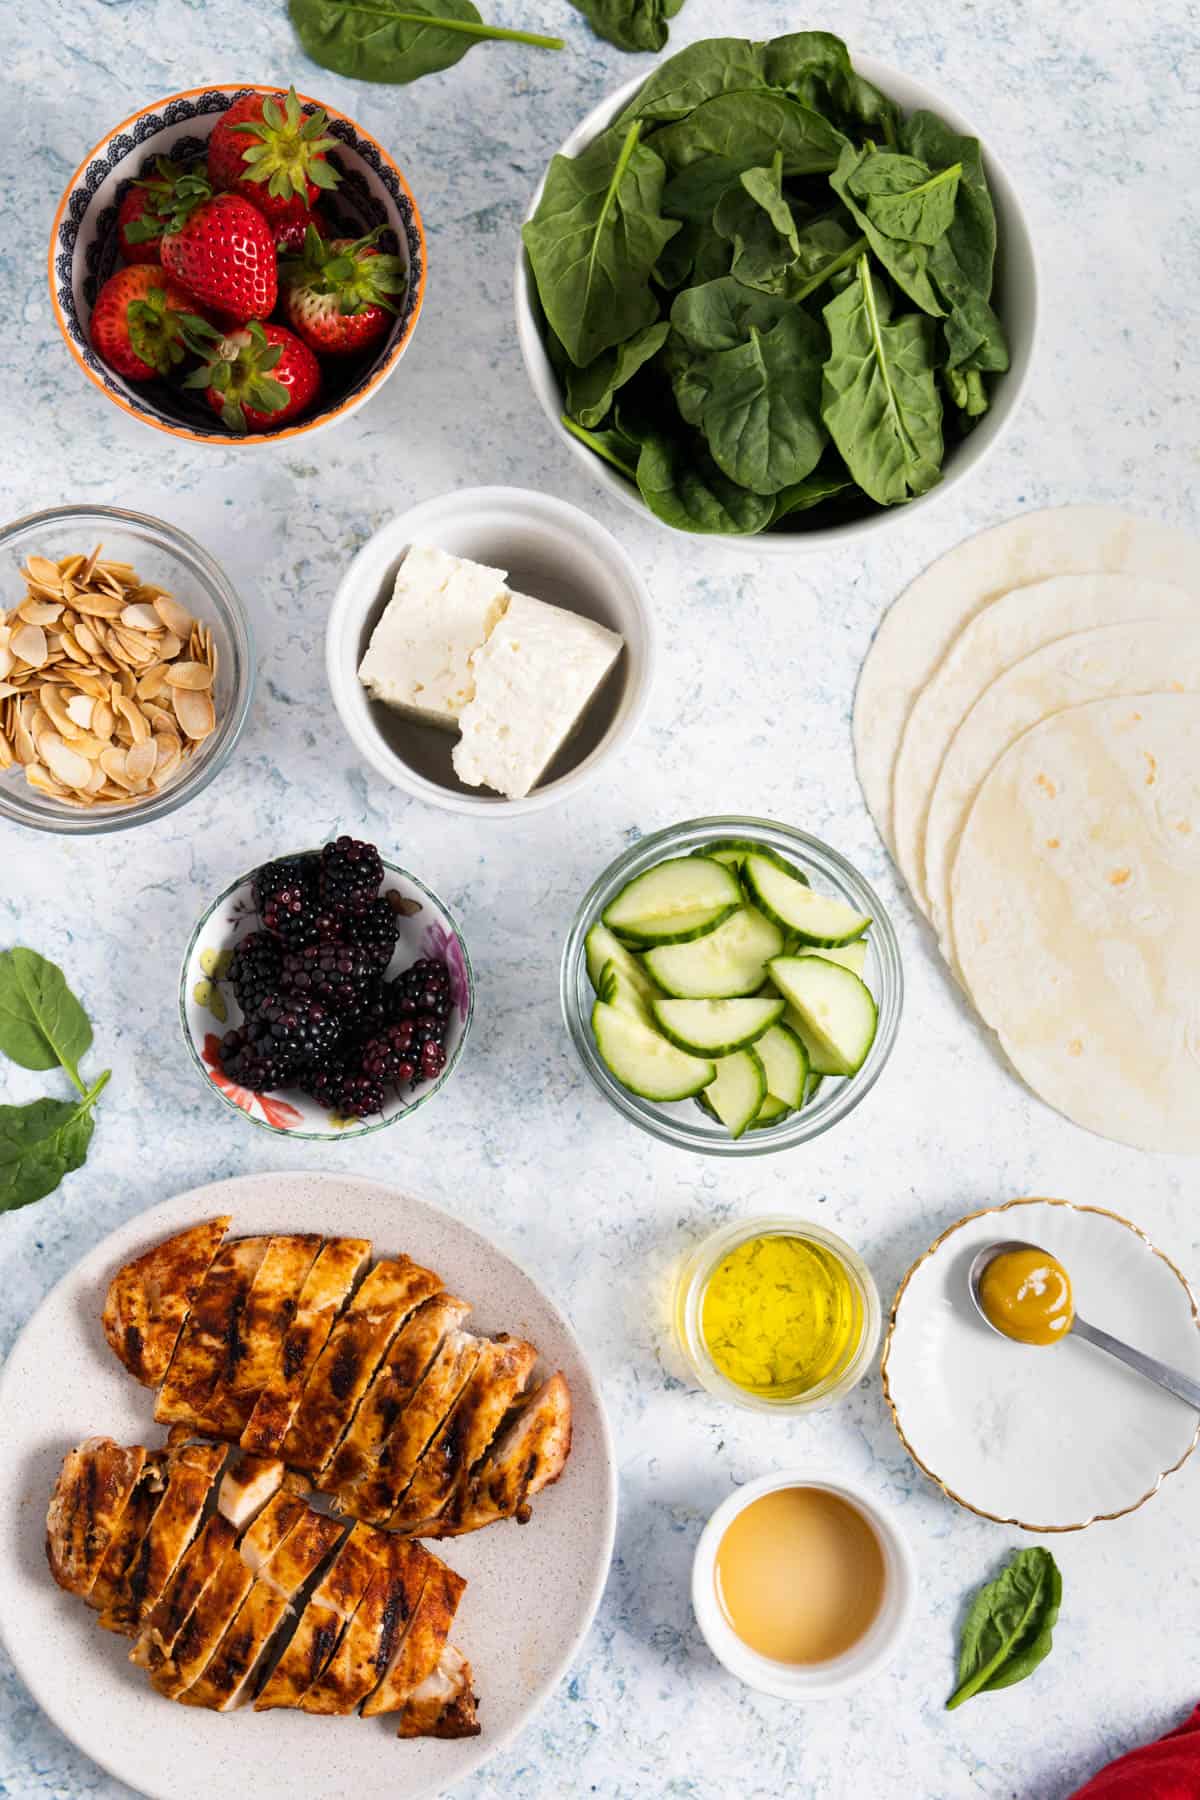 ingredients for a salad: spinach, strawberries, blackberries, cucumber, feta, toasted almond, grilled chicken, tortillas